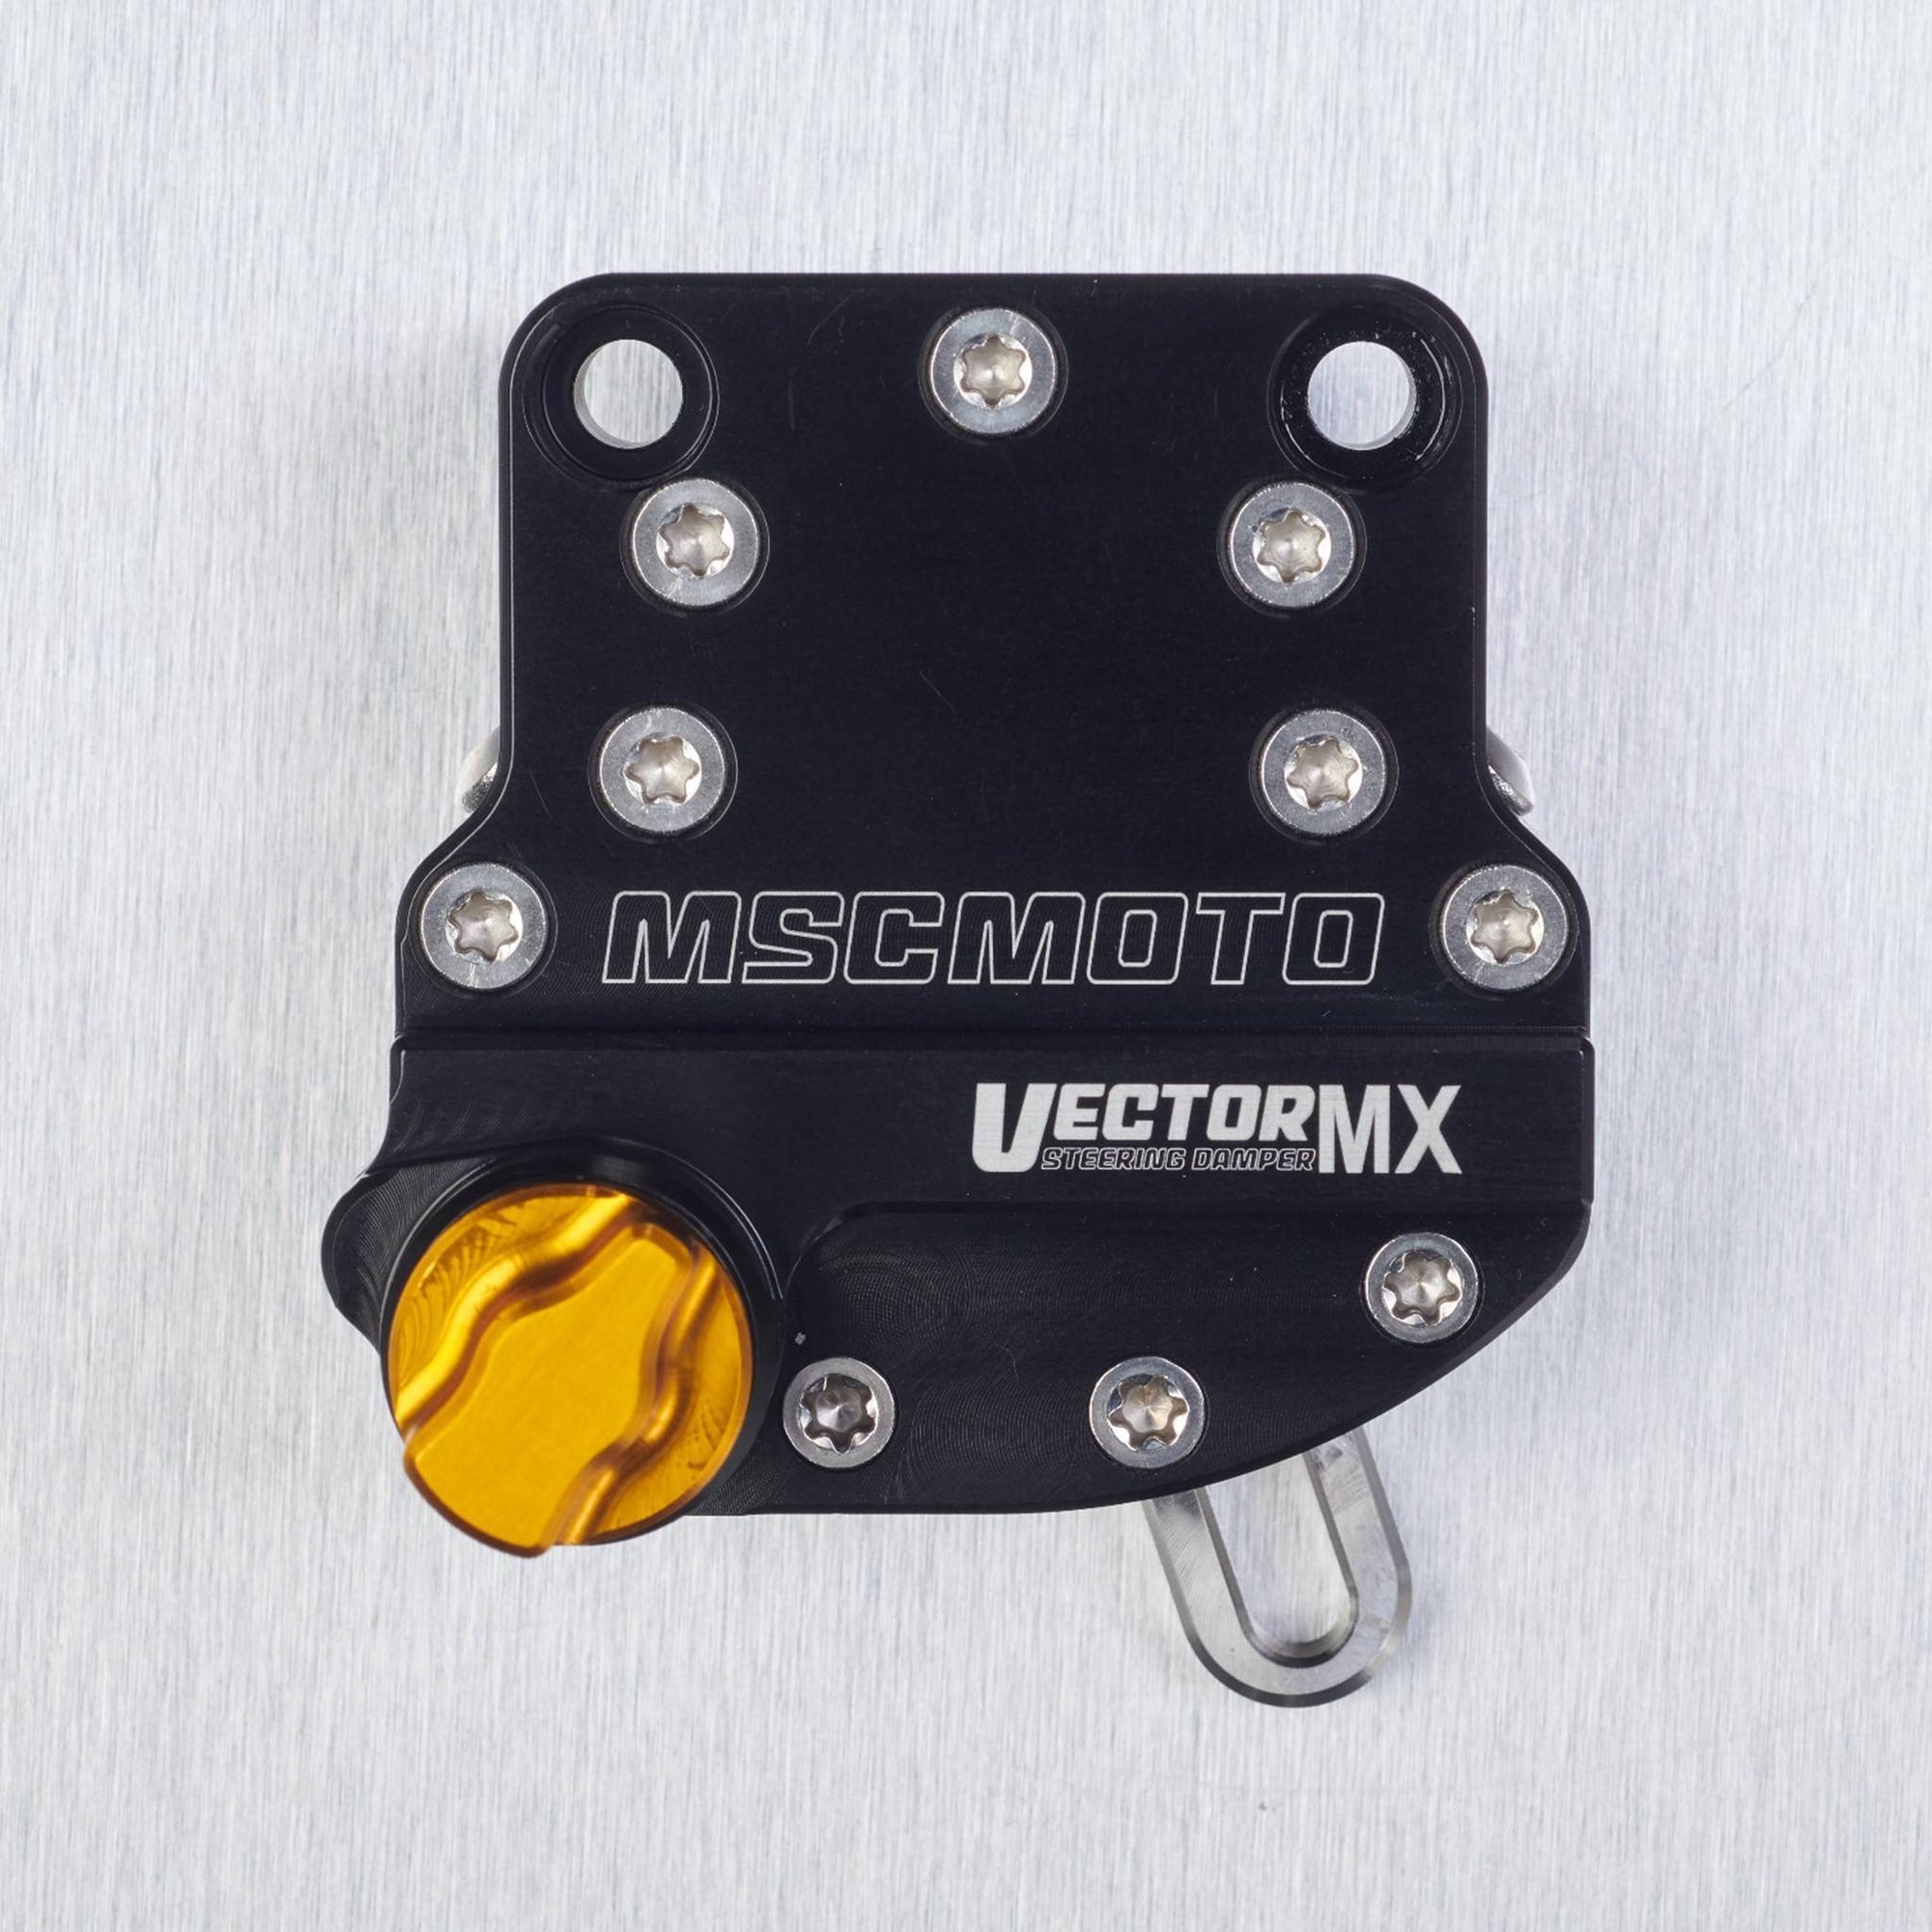 mscmotousa, VectorMX Steering Damper Kit "Down Under" Mount (VEC0011) - YAMAHA YZ250, VEC0011, vectormx, yamaha, yamaha-2013-yz250-esi7751076, , Imported and distributed in North & South America by Lindeco Genuine Powersports.